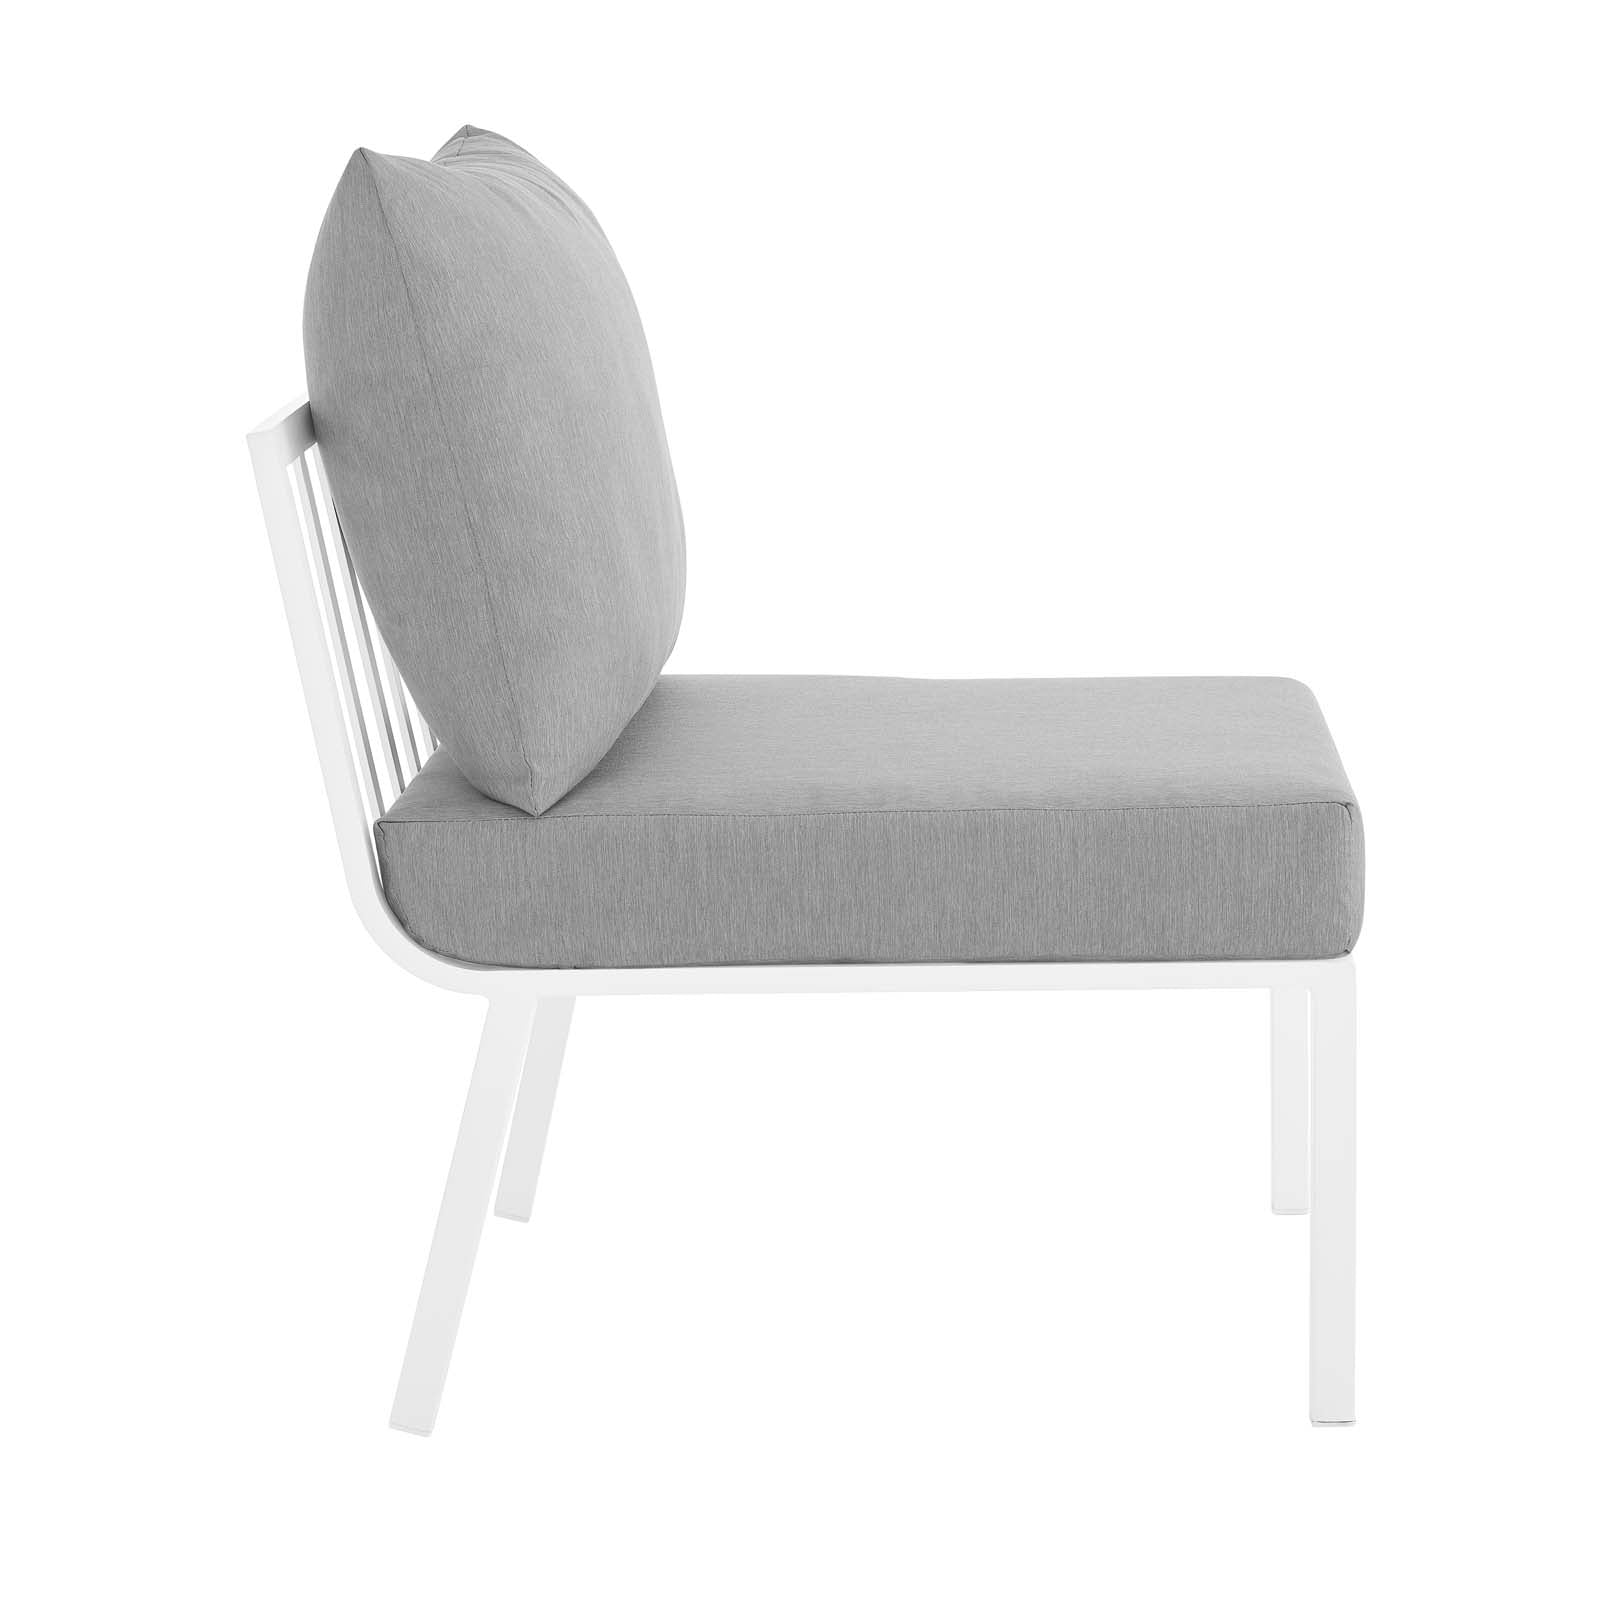 Modway Outdoor Chairs - Riverside Outdoor Patio Aluminum Armless Chair White Gray